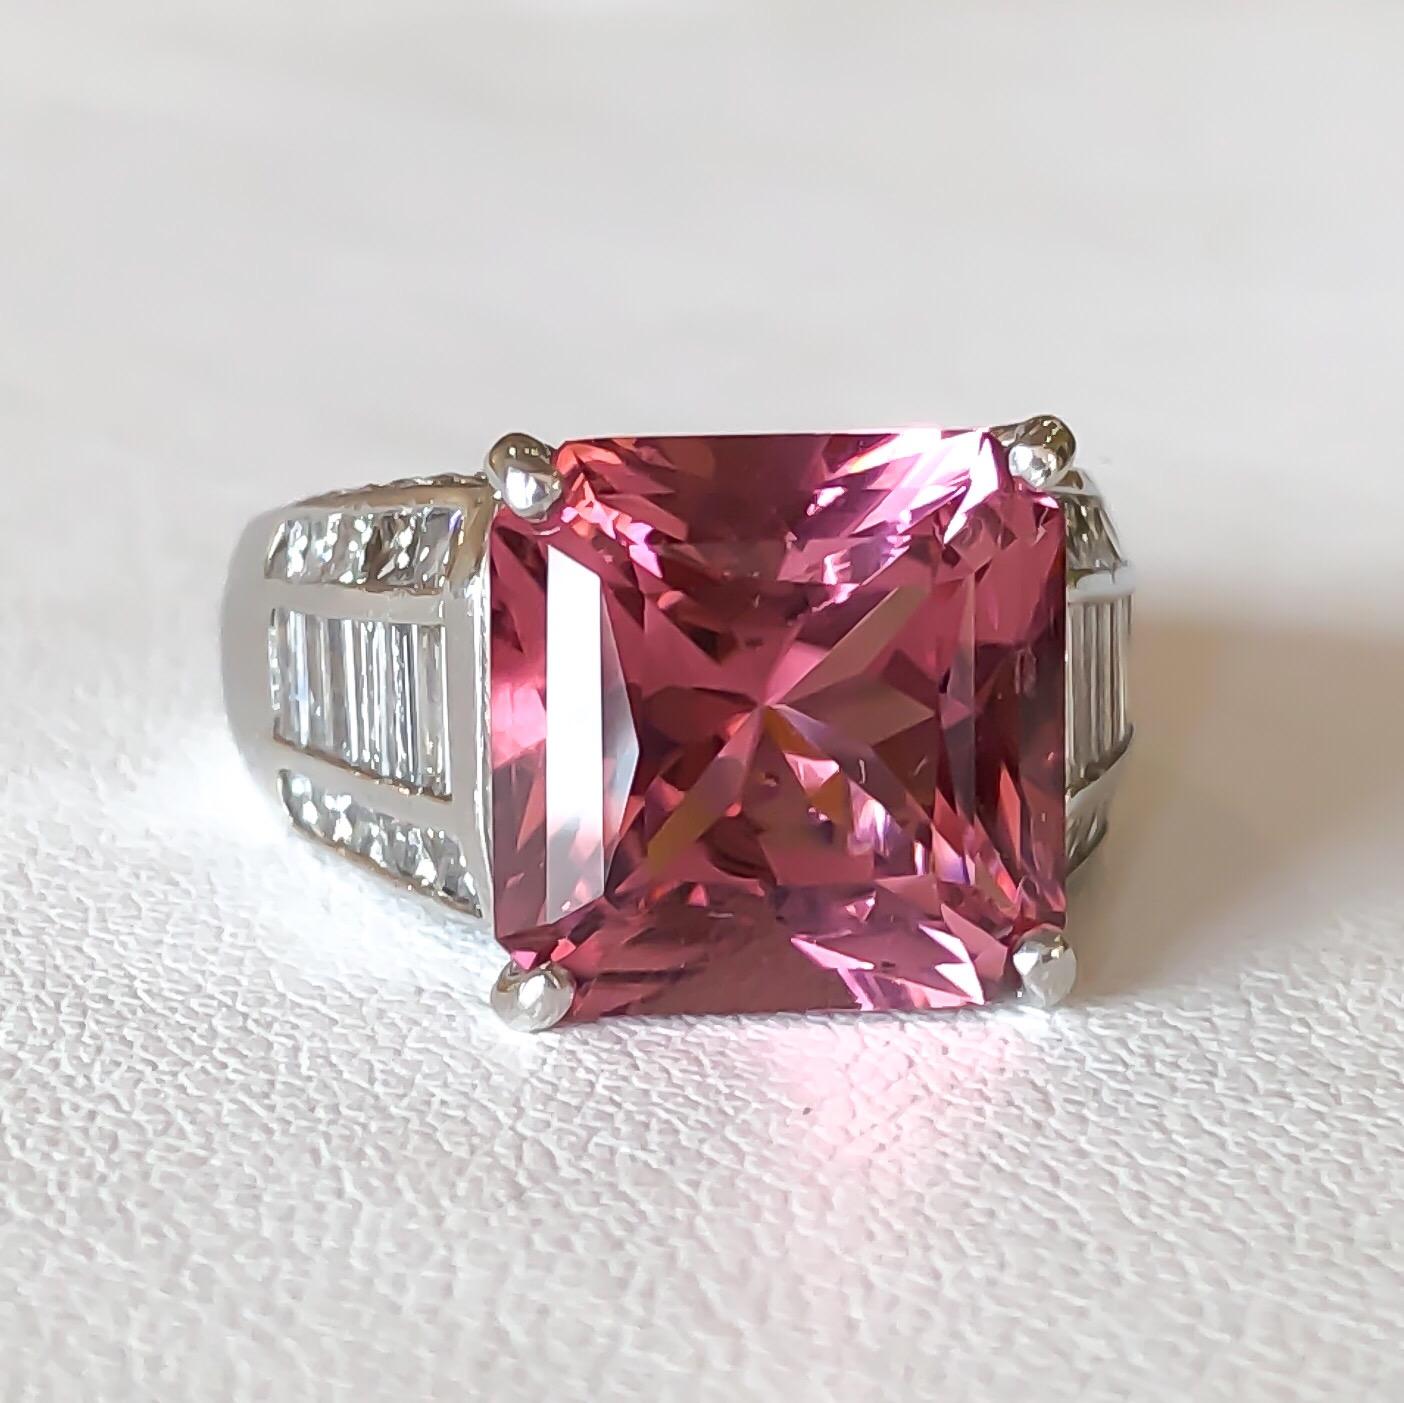 This ring is designed by J.B. STAR in Platinum set with a vibrant natural pink Tourmaline. The Tourmaline is a fancy mixed princess cut shape set in four prongs. Pave set round brilliant cut diamonds, channel set princess and straight baguette cut